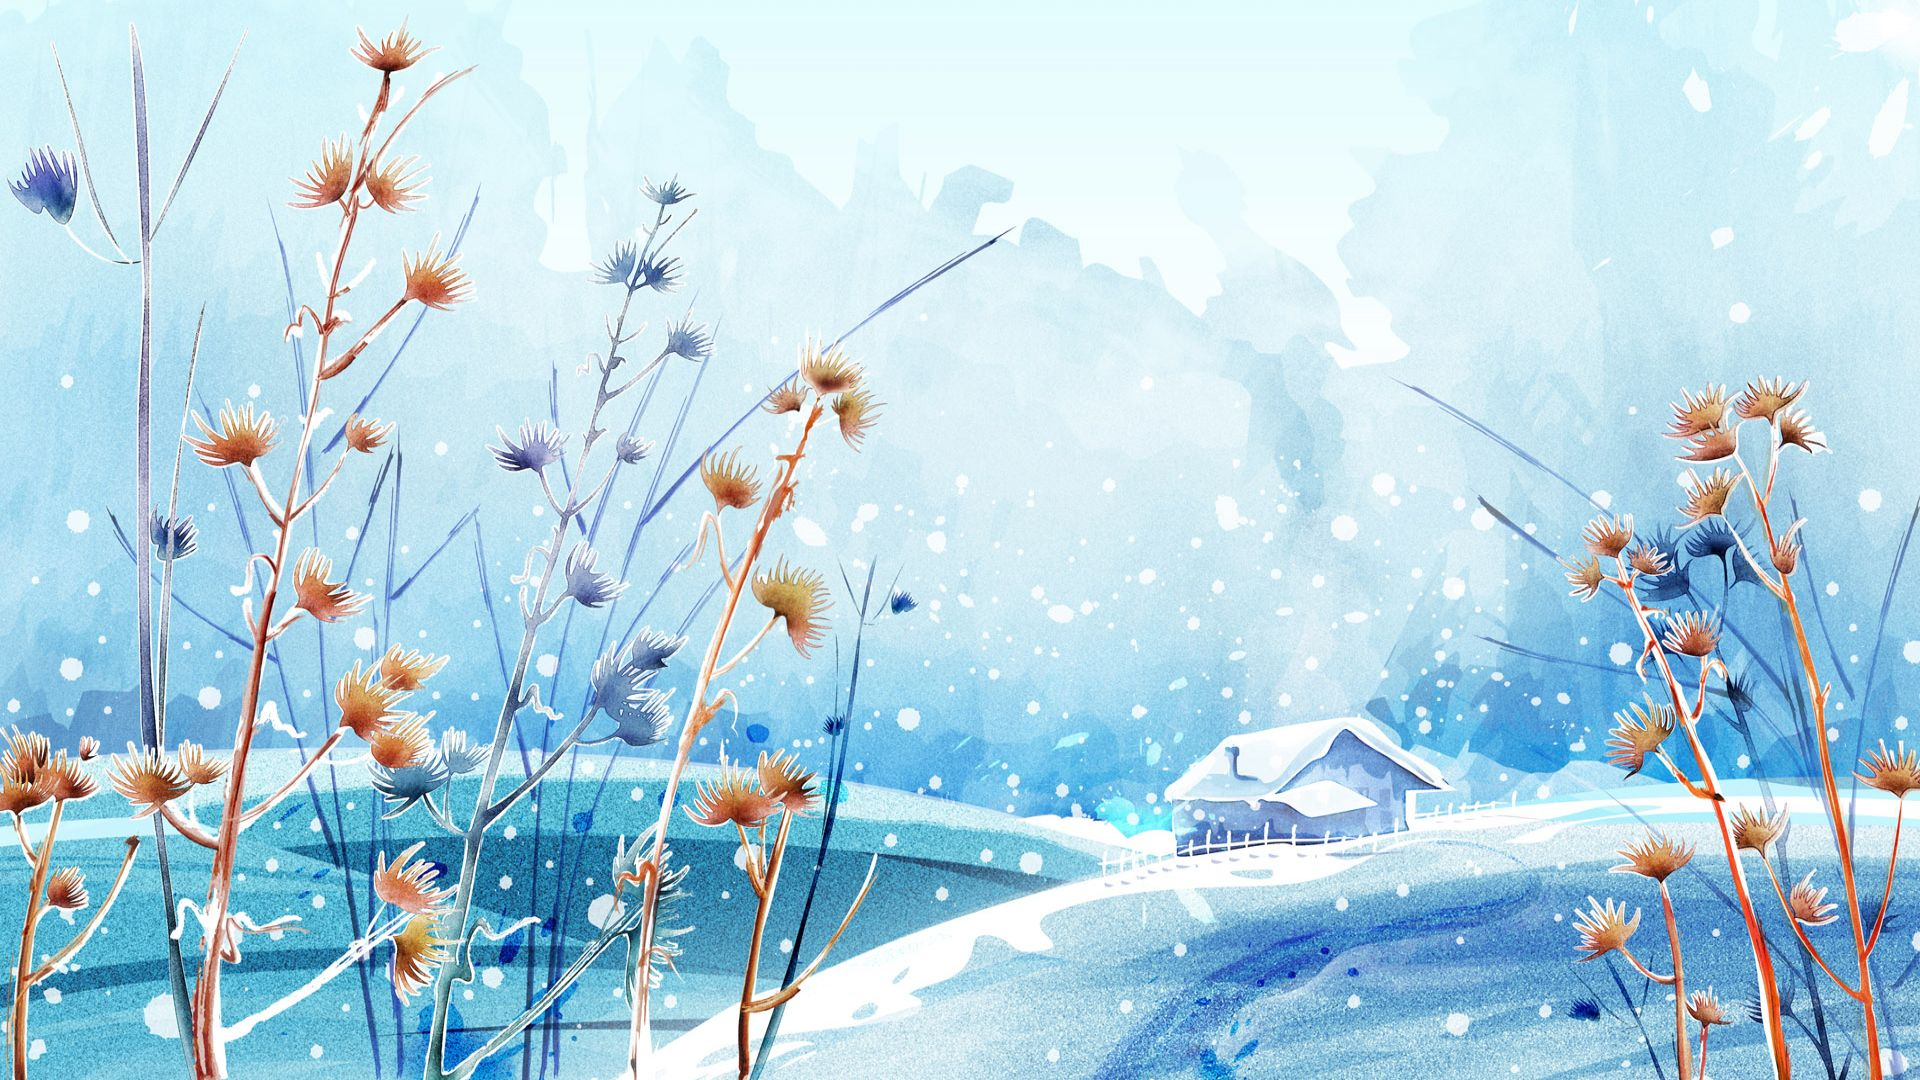 FreePhotoz Daily Wallpapers & Backgrounds - Seasons Winter